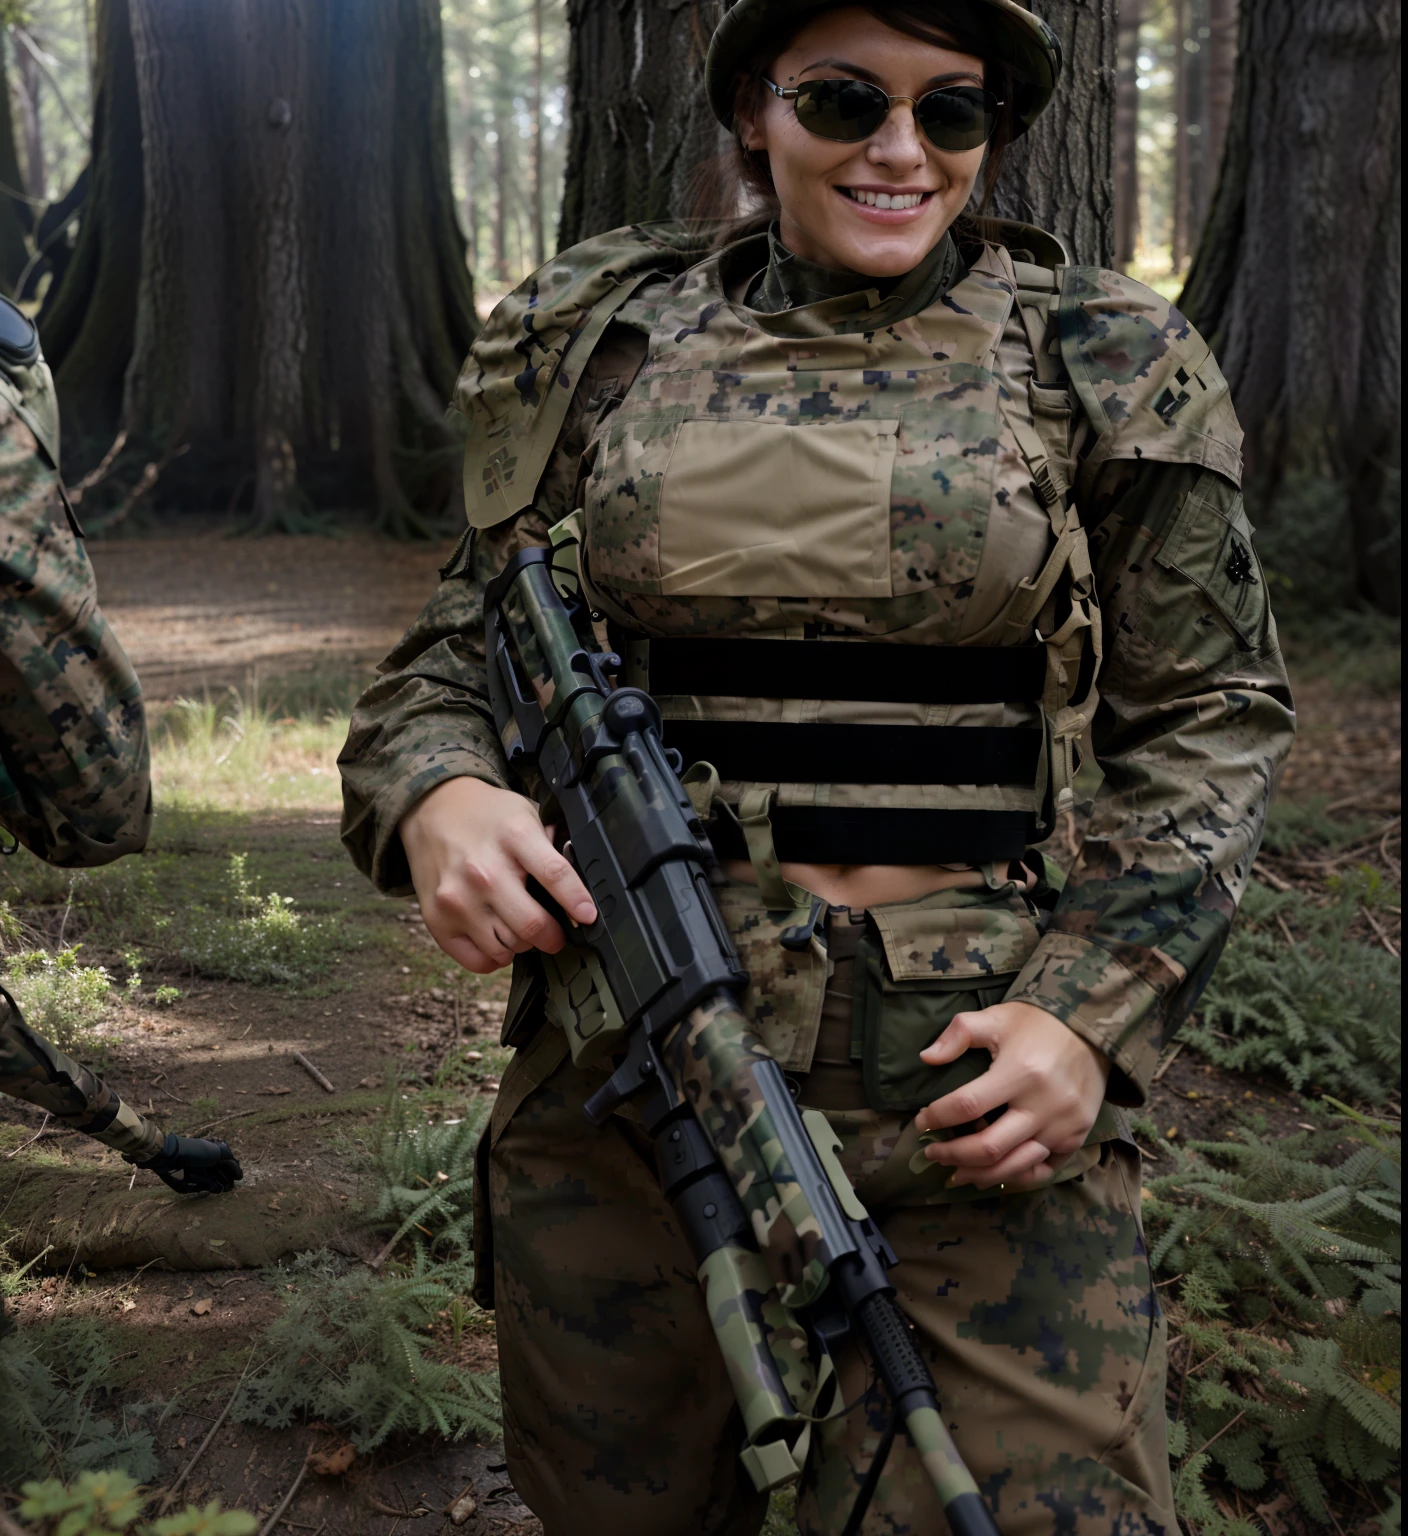 there is a woman marine in camouflage carrying a rifle, smiling woman with sunglasses, futuristic female soldier, marine, photo realistic woman in armor, body builder female in camouflage in a forest, 